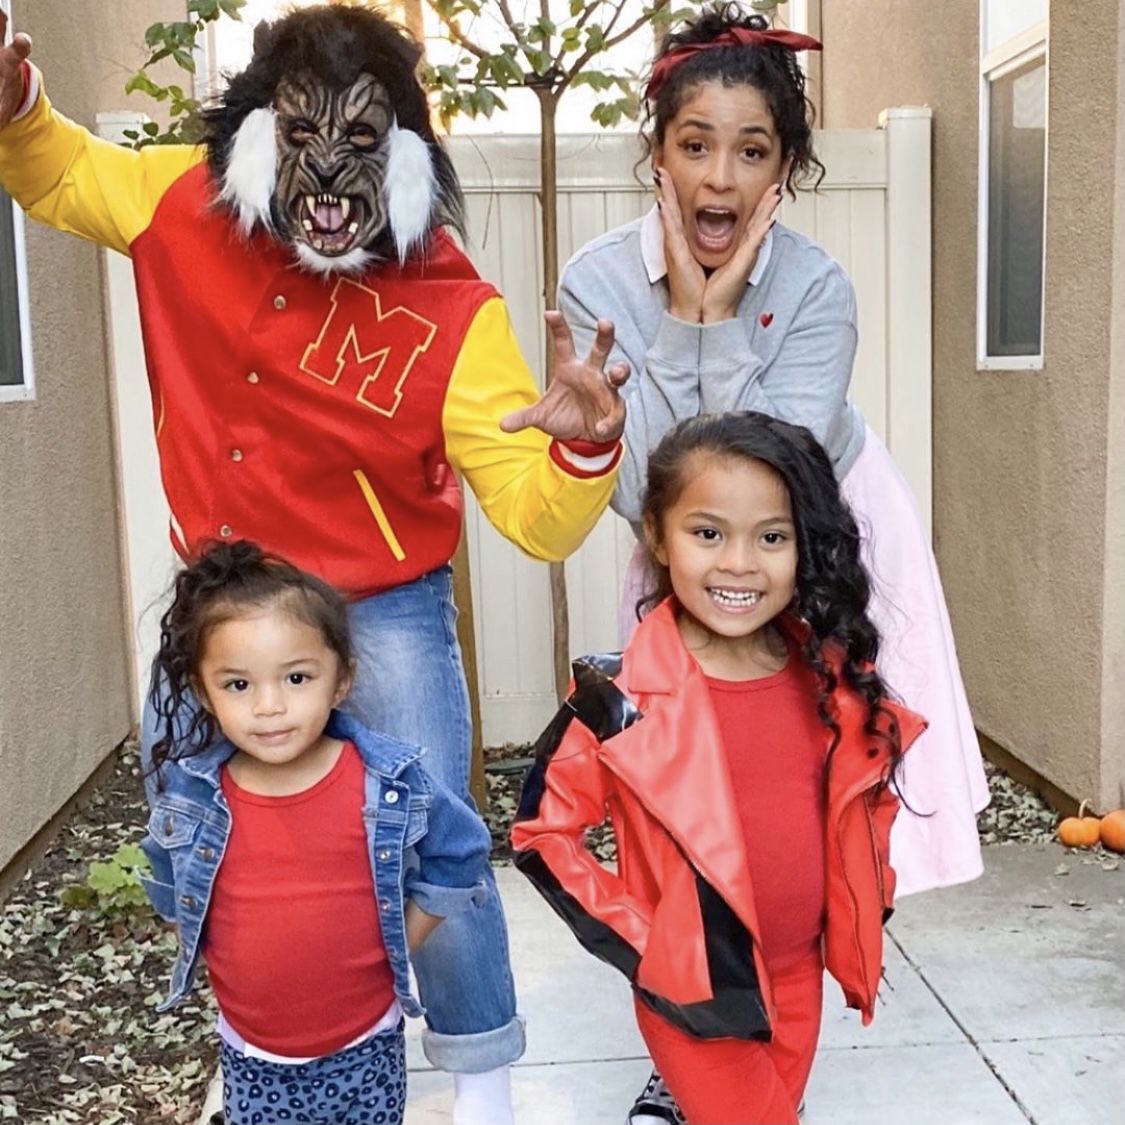 DIY Moana Family Halloween Costumes - Life With My Littles